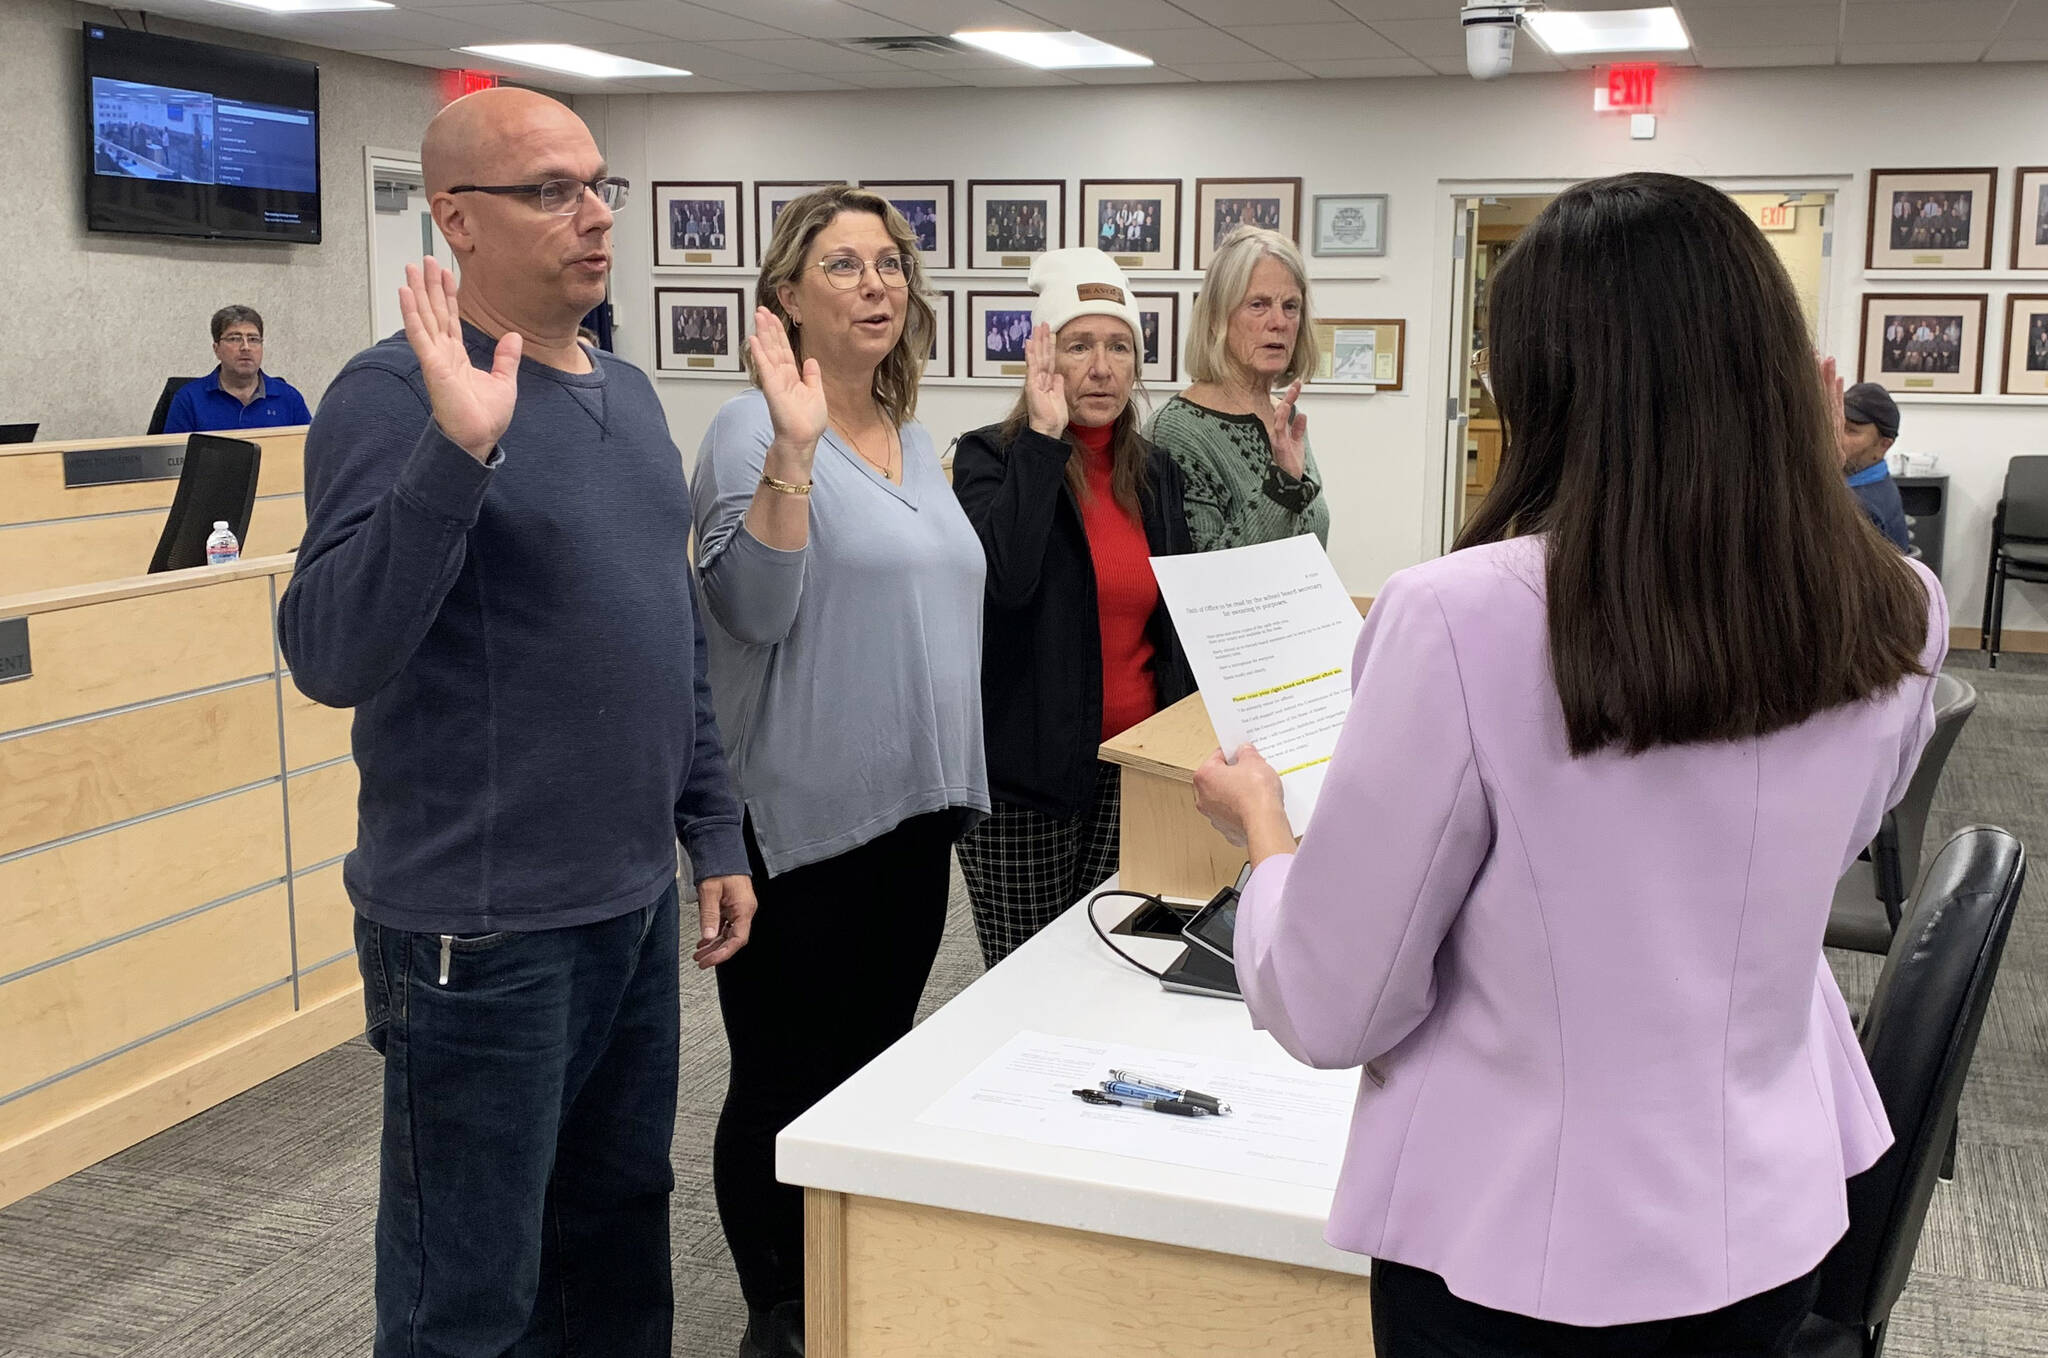 From left, Kenai Peninsula Borough School District Board of Education members Jason Tauriainen, Kelley Cizek, Dianne MacRae and Penny Vadla are sworn in by District Secretary Nikkol Sipes during a special school board meeting on Monday, Oct. 16, 2023 in Soldotna, Alaska. (Ashlyn O’Hara/Peninsula Clarion)